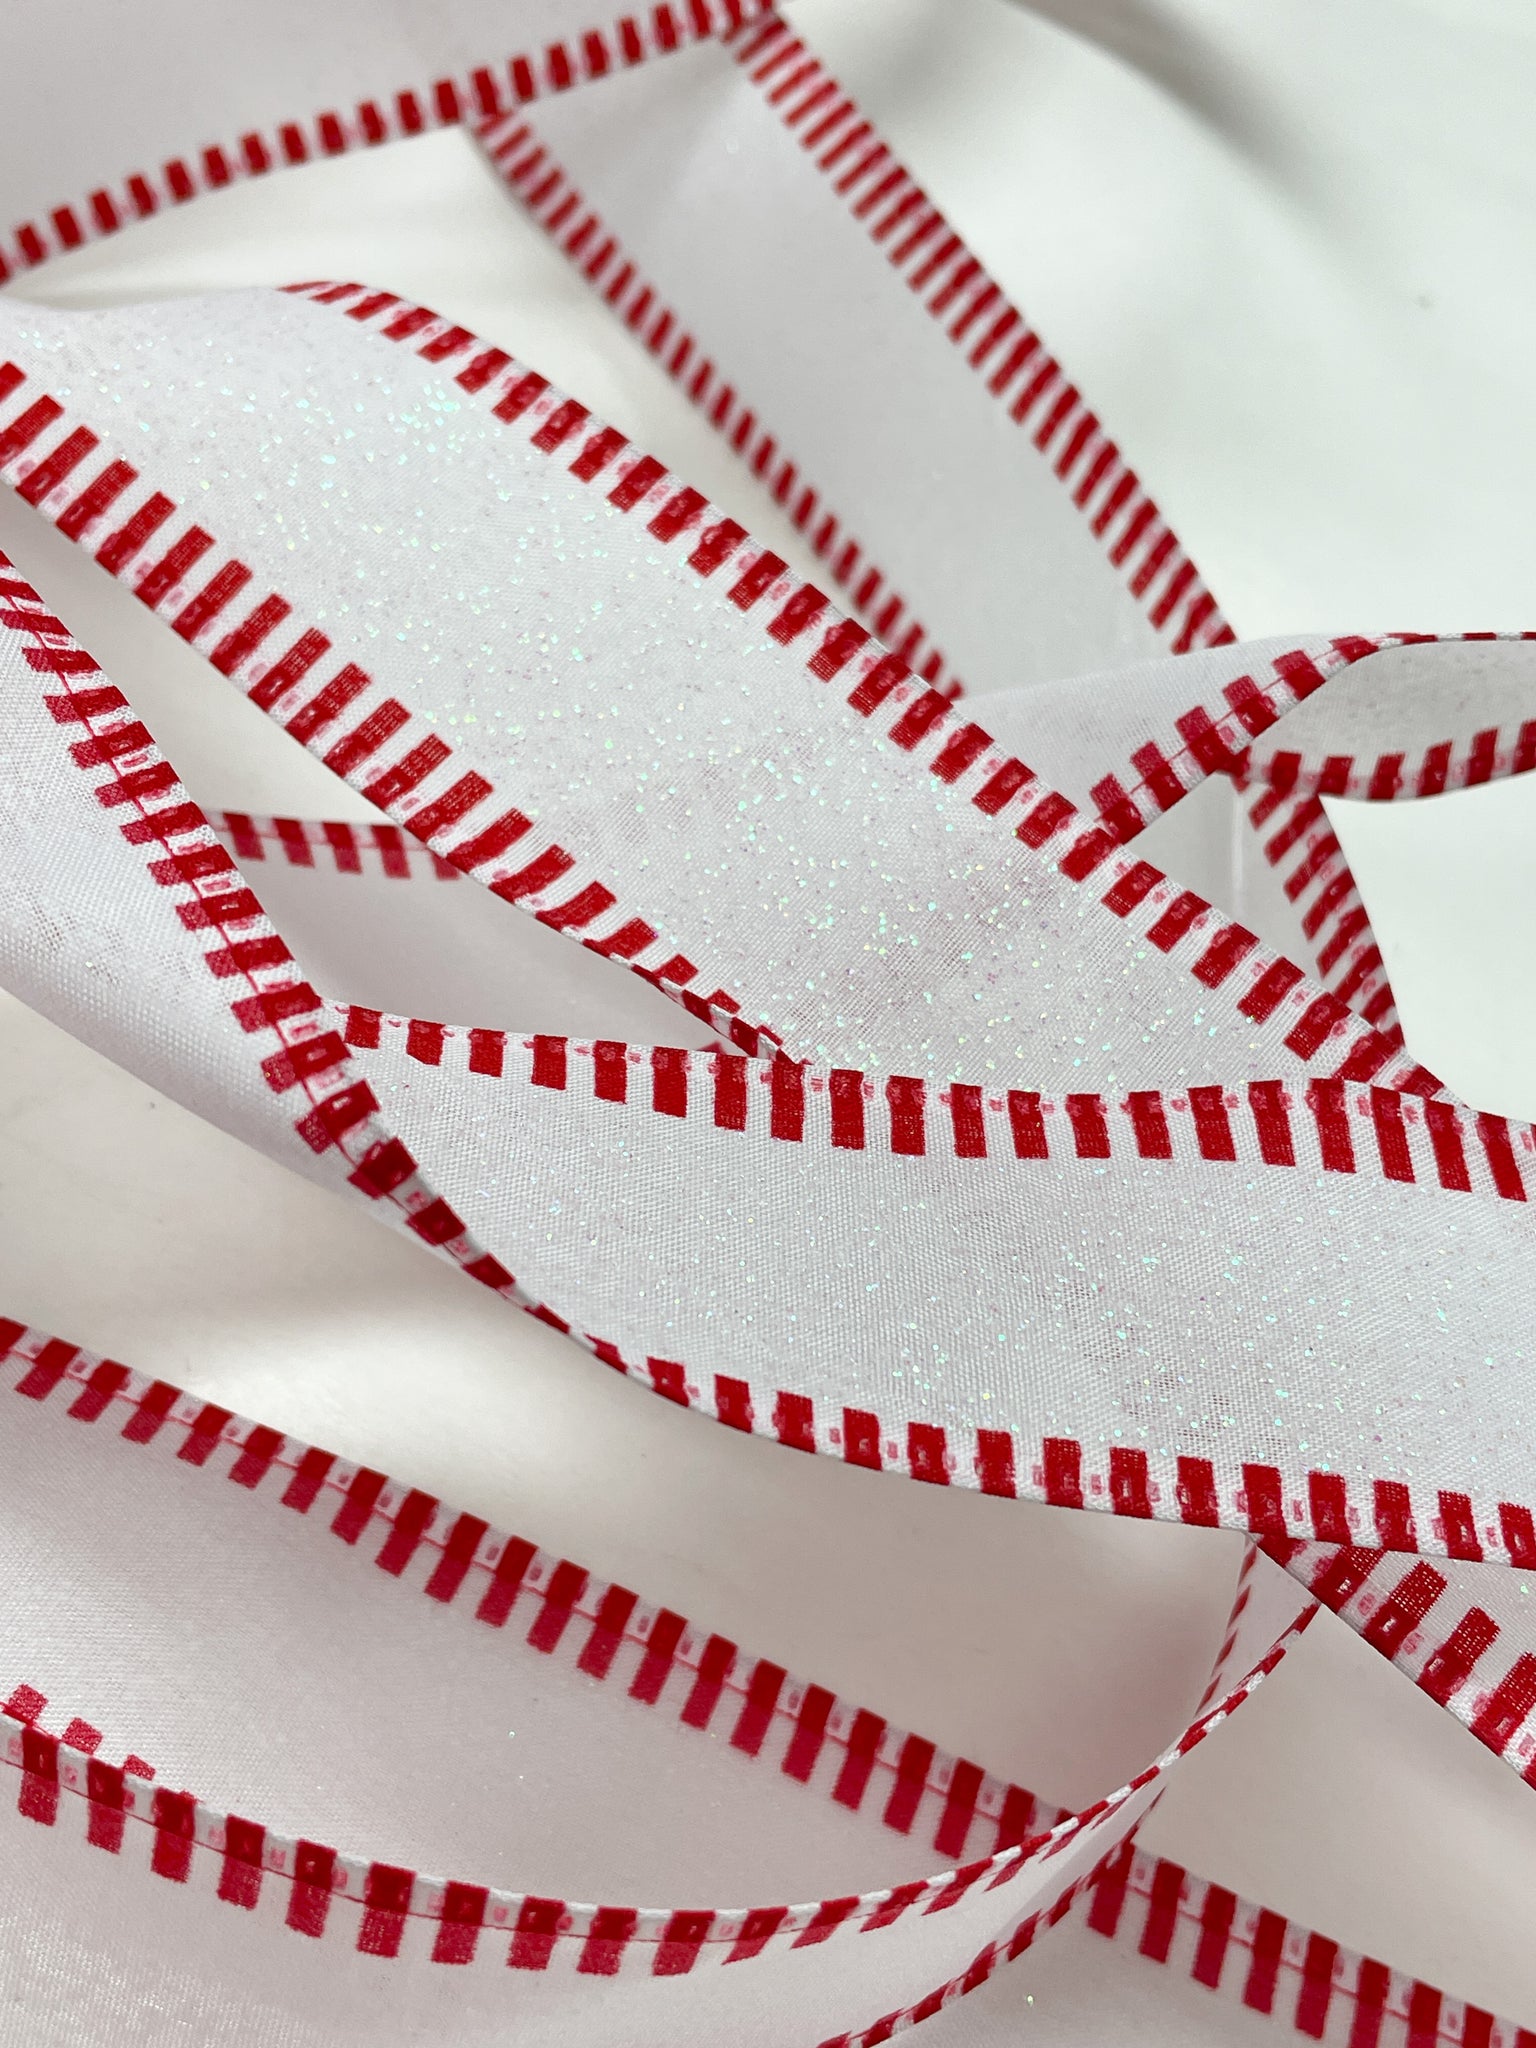 7 1/2 YD Wired Ribbon - White with Iridescent Glitter and Red Stripes